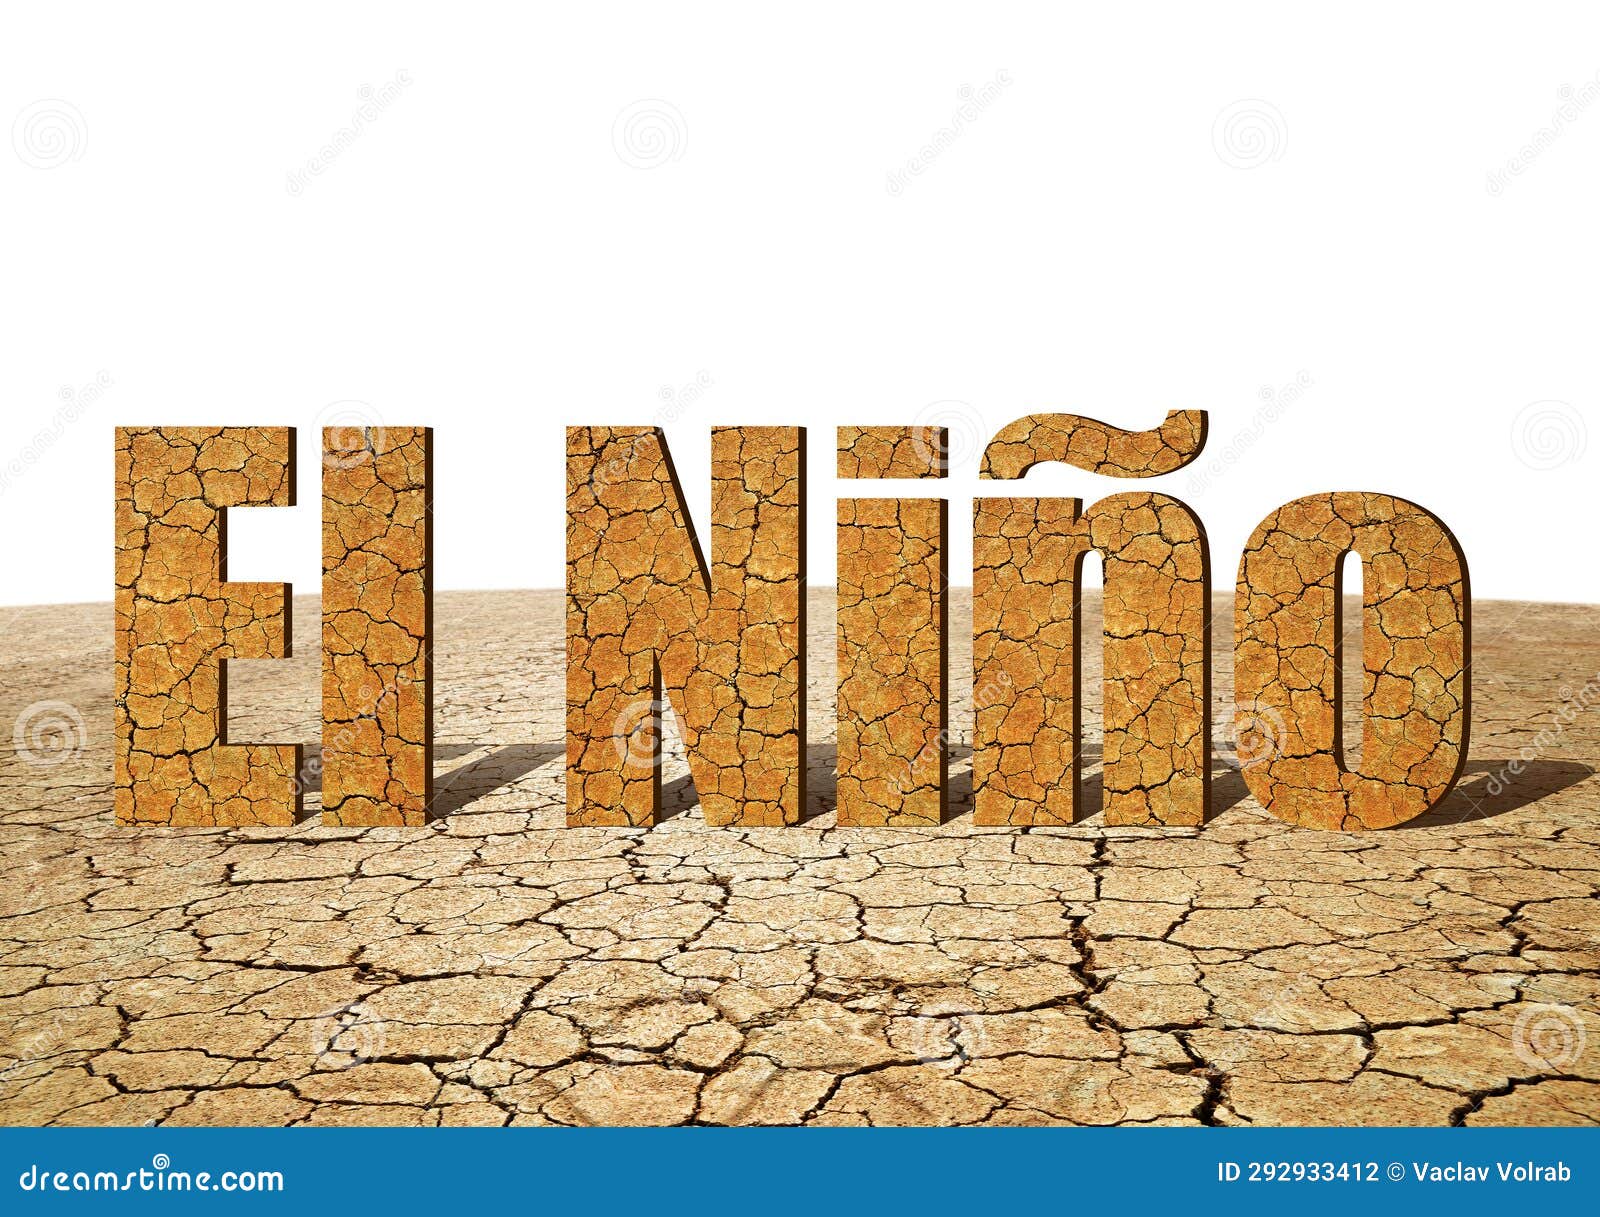 el niÃ±o text made from dry cracked soil.